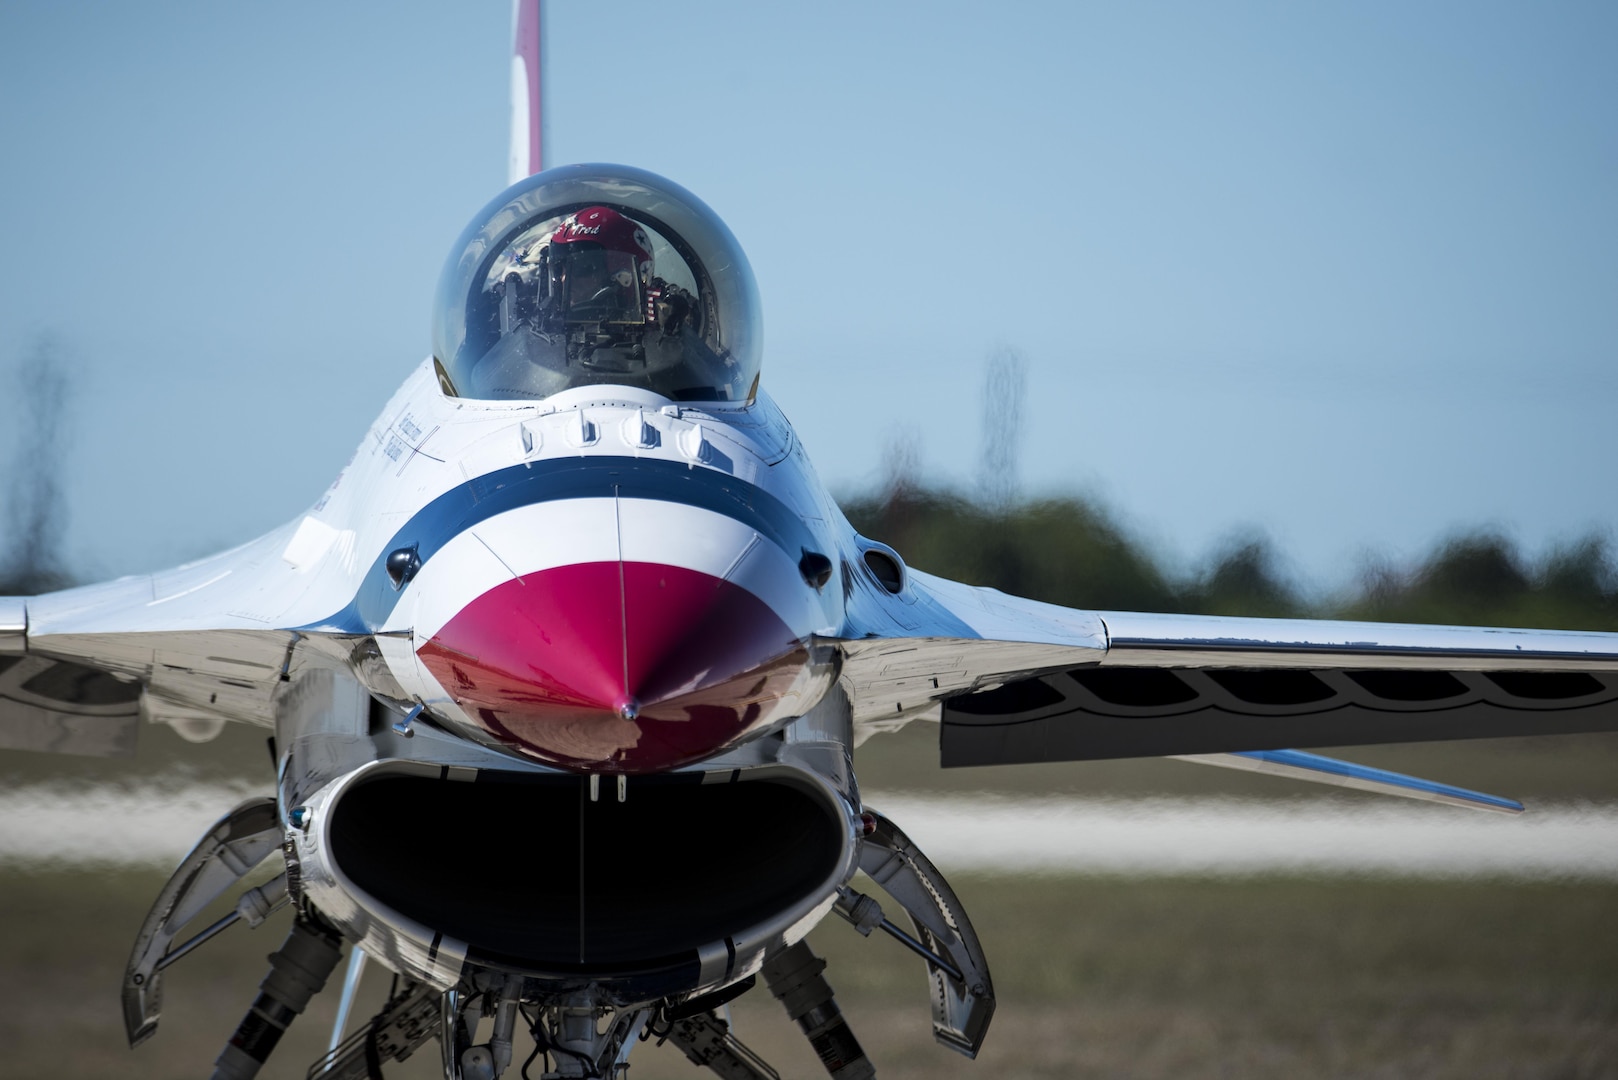 Capt. Nicholas Eberling, U.S. Air Force Air Demonstration Squadron “Thunderbirds” opposing solo pilot, taxis on the Joint Base San Antonio-Randolph flightline Oct. 26, 2015. The Thunderbirds perform for people all around the world, displaying the pride, precision and professionalism of American Airmen.